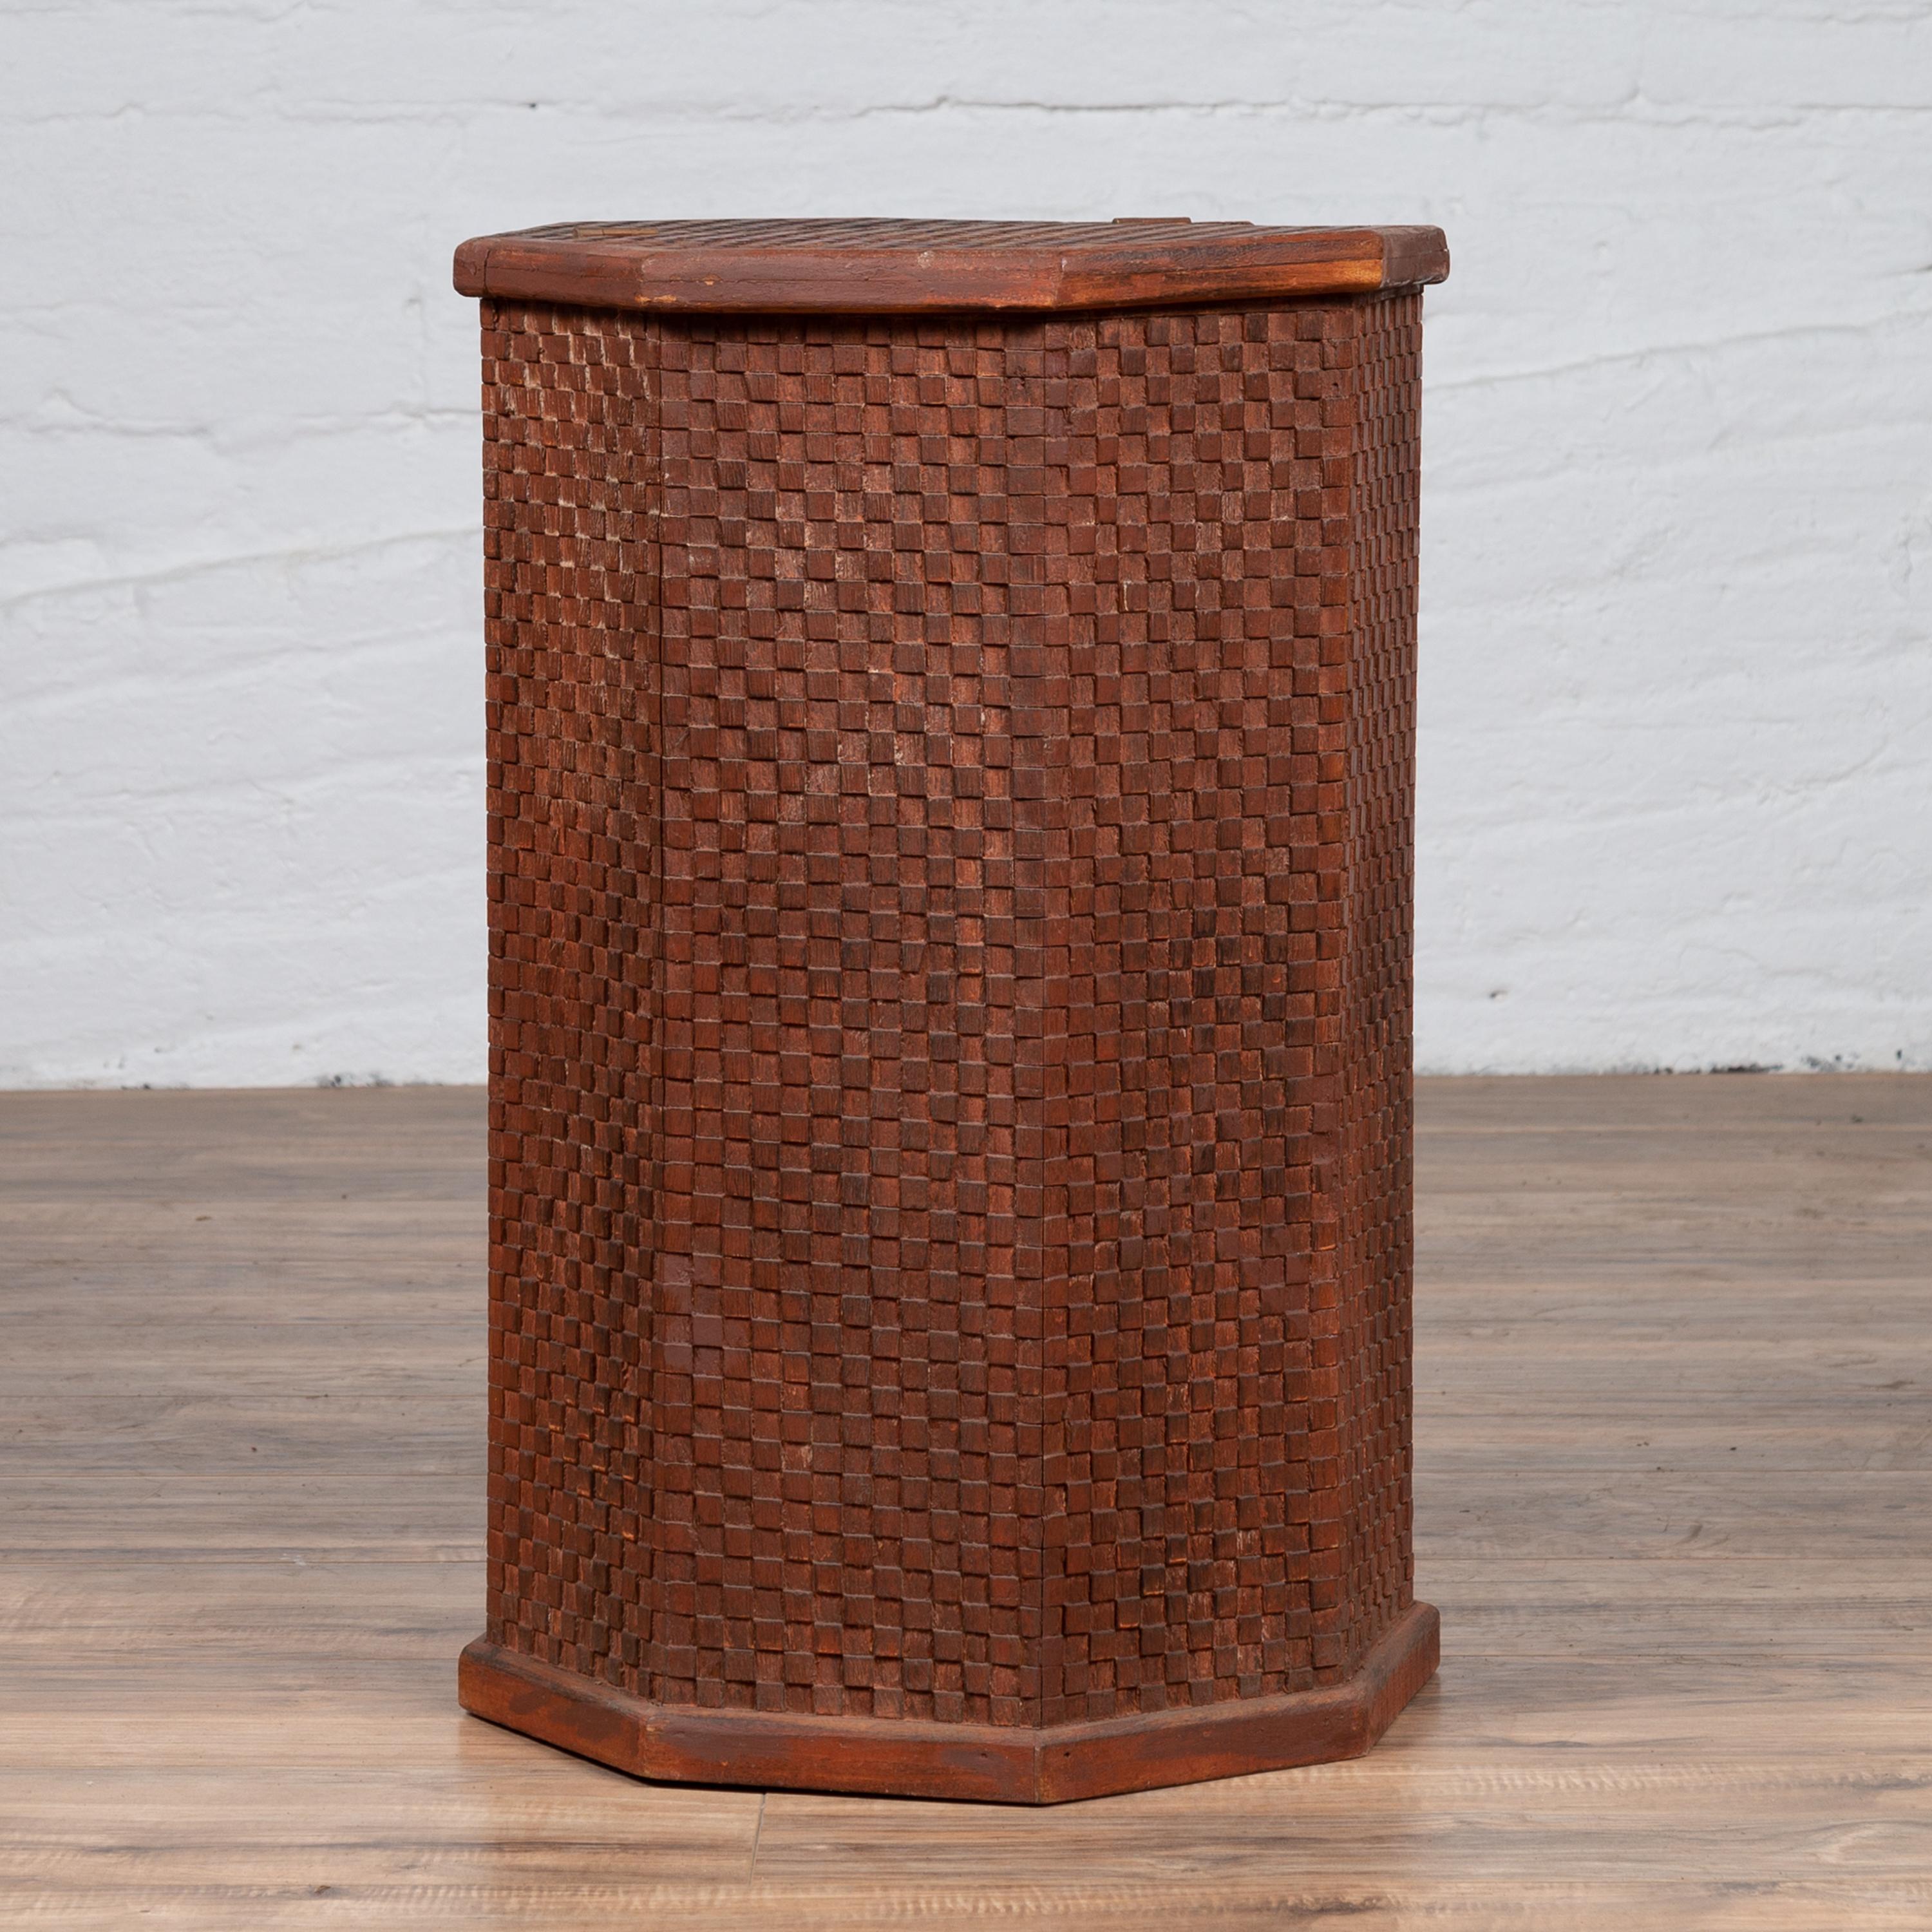 A Thai vintage hexagonal wooden clothes hamper from the mid-20th century, with checkered patterns. Born in Thailand during the mid-century period, these charming clothes hamper features a hexagonal shape adorned with checkered motifs. The top